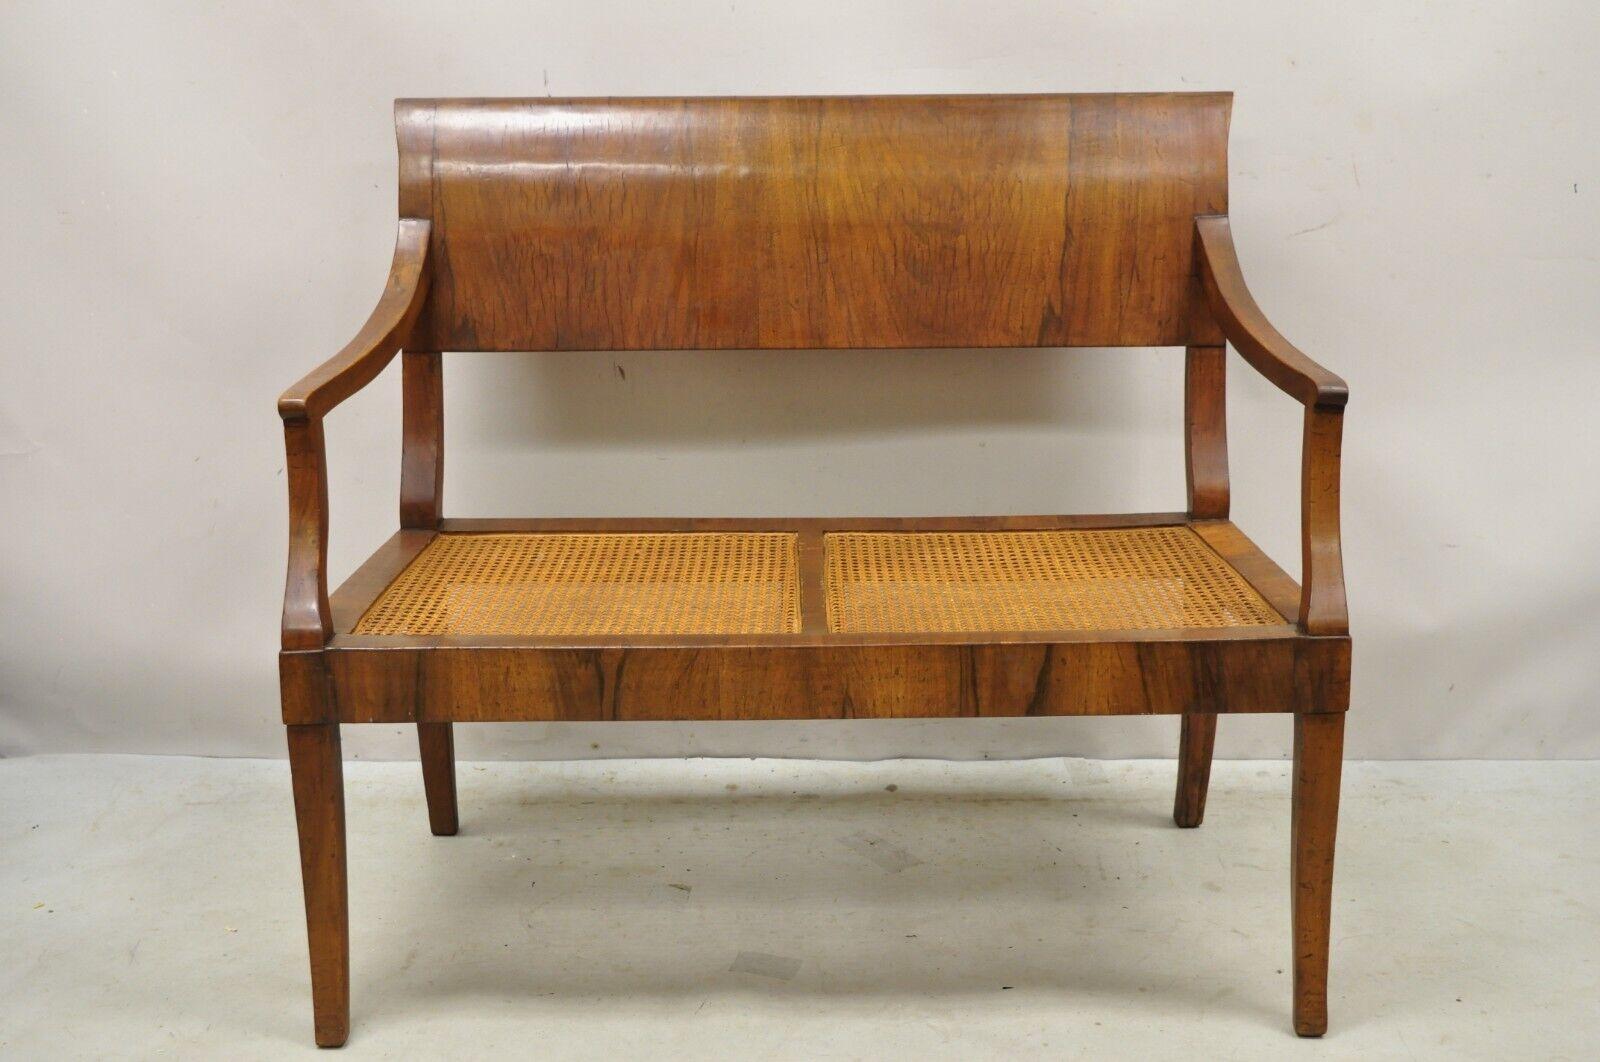 Antique Italian Biedermeier Style Elm Wood Cane Seat Walnut Bench Settee.  Item features a cane seat, beautiful wood grain, shapely saber legs. Circa  Early to Mid 20th Century. Measurements: 36